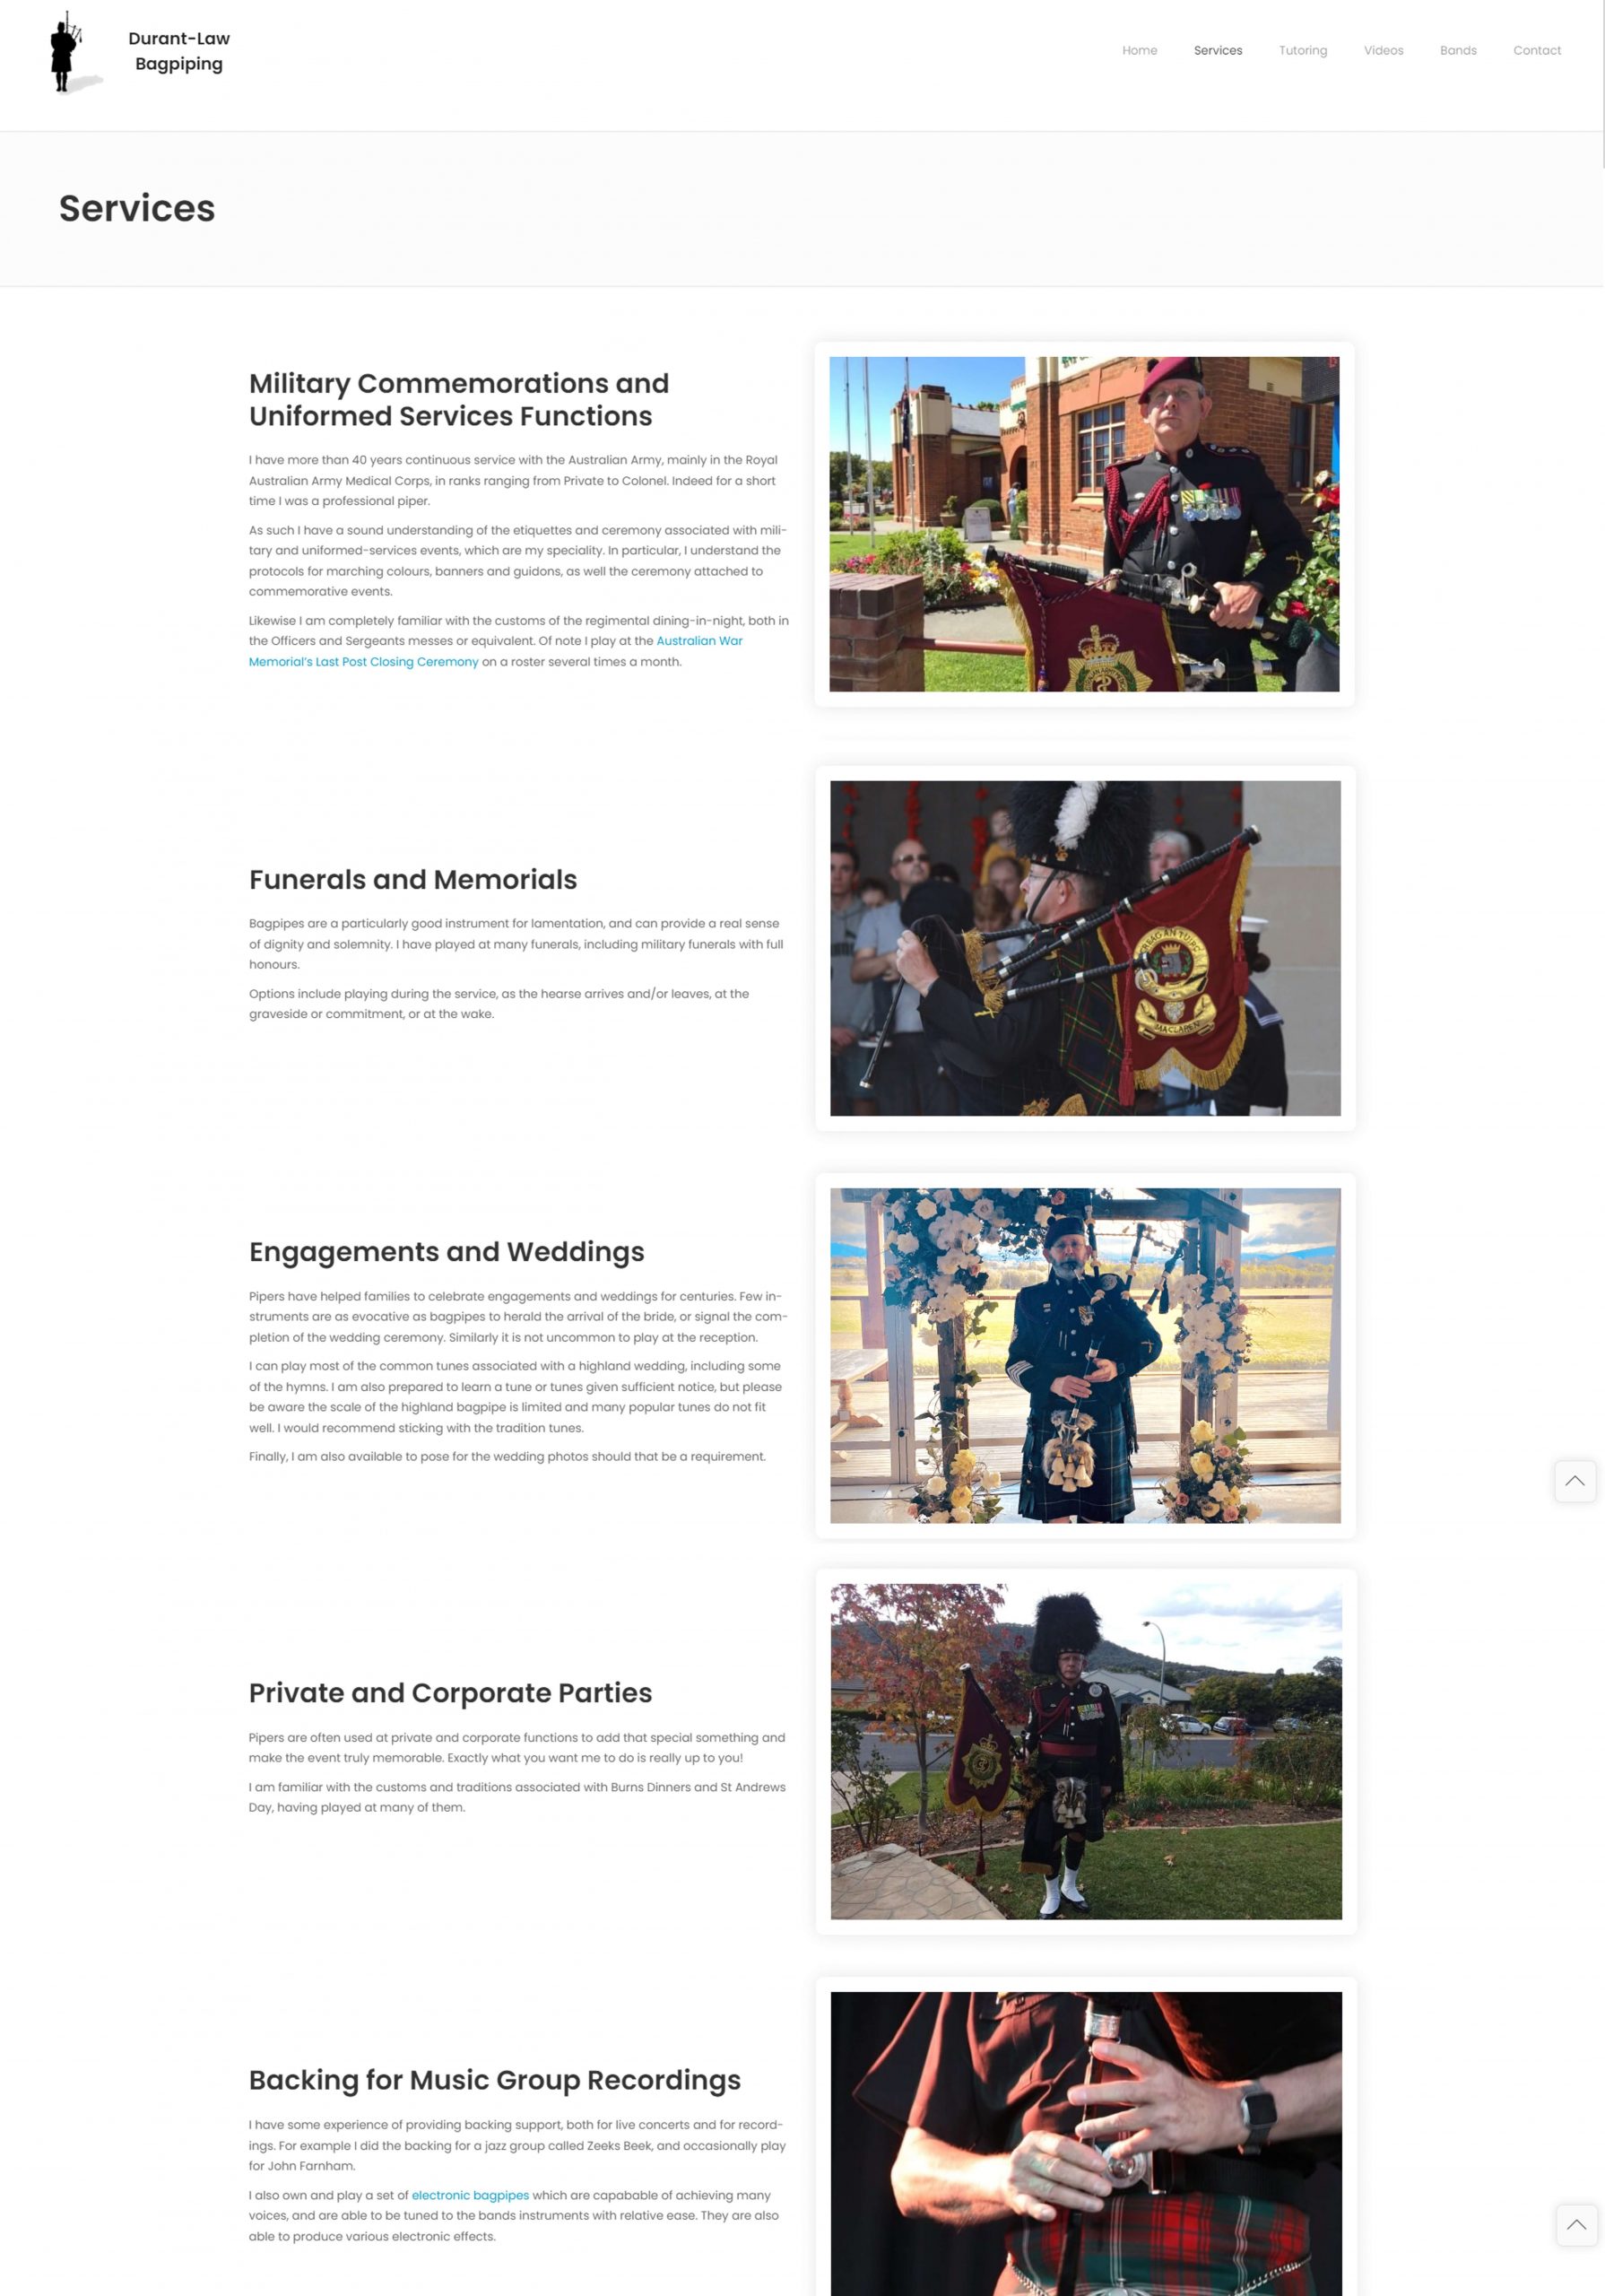 Durant-Law Bagpiping Website Redesign